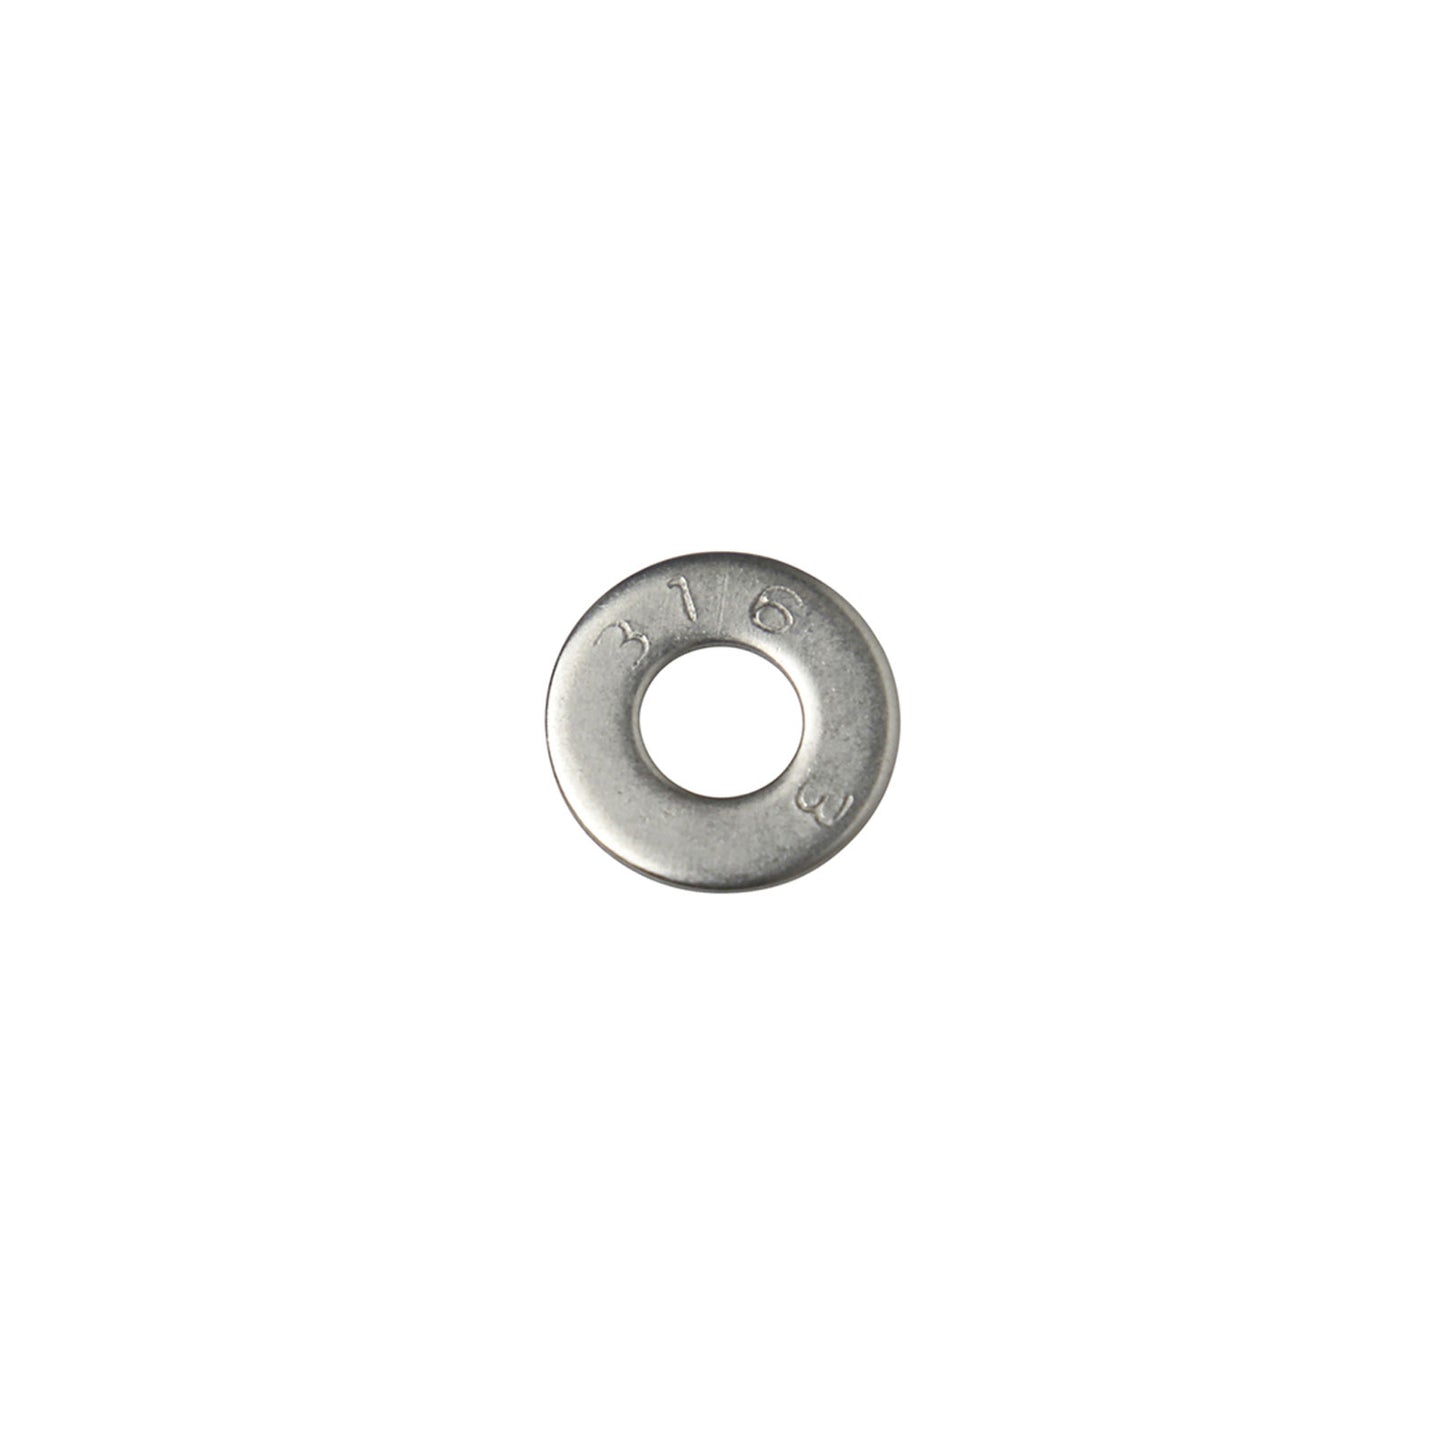 1/4" Conquest SAE Flat Washer - 316 Stainless Steel